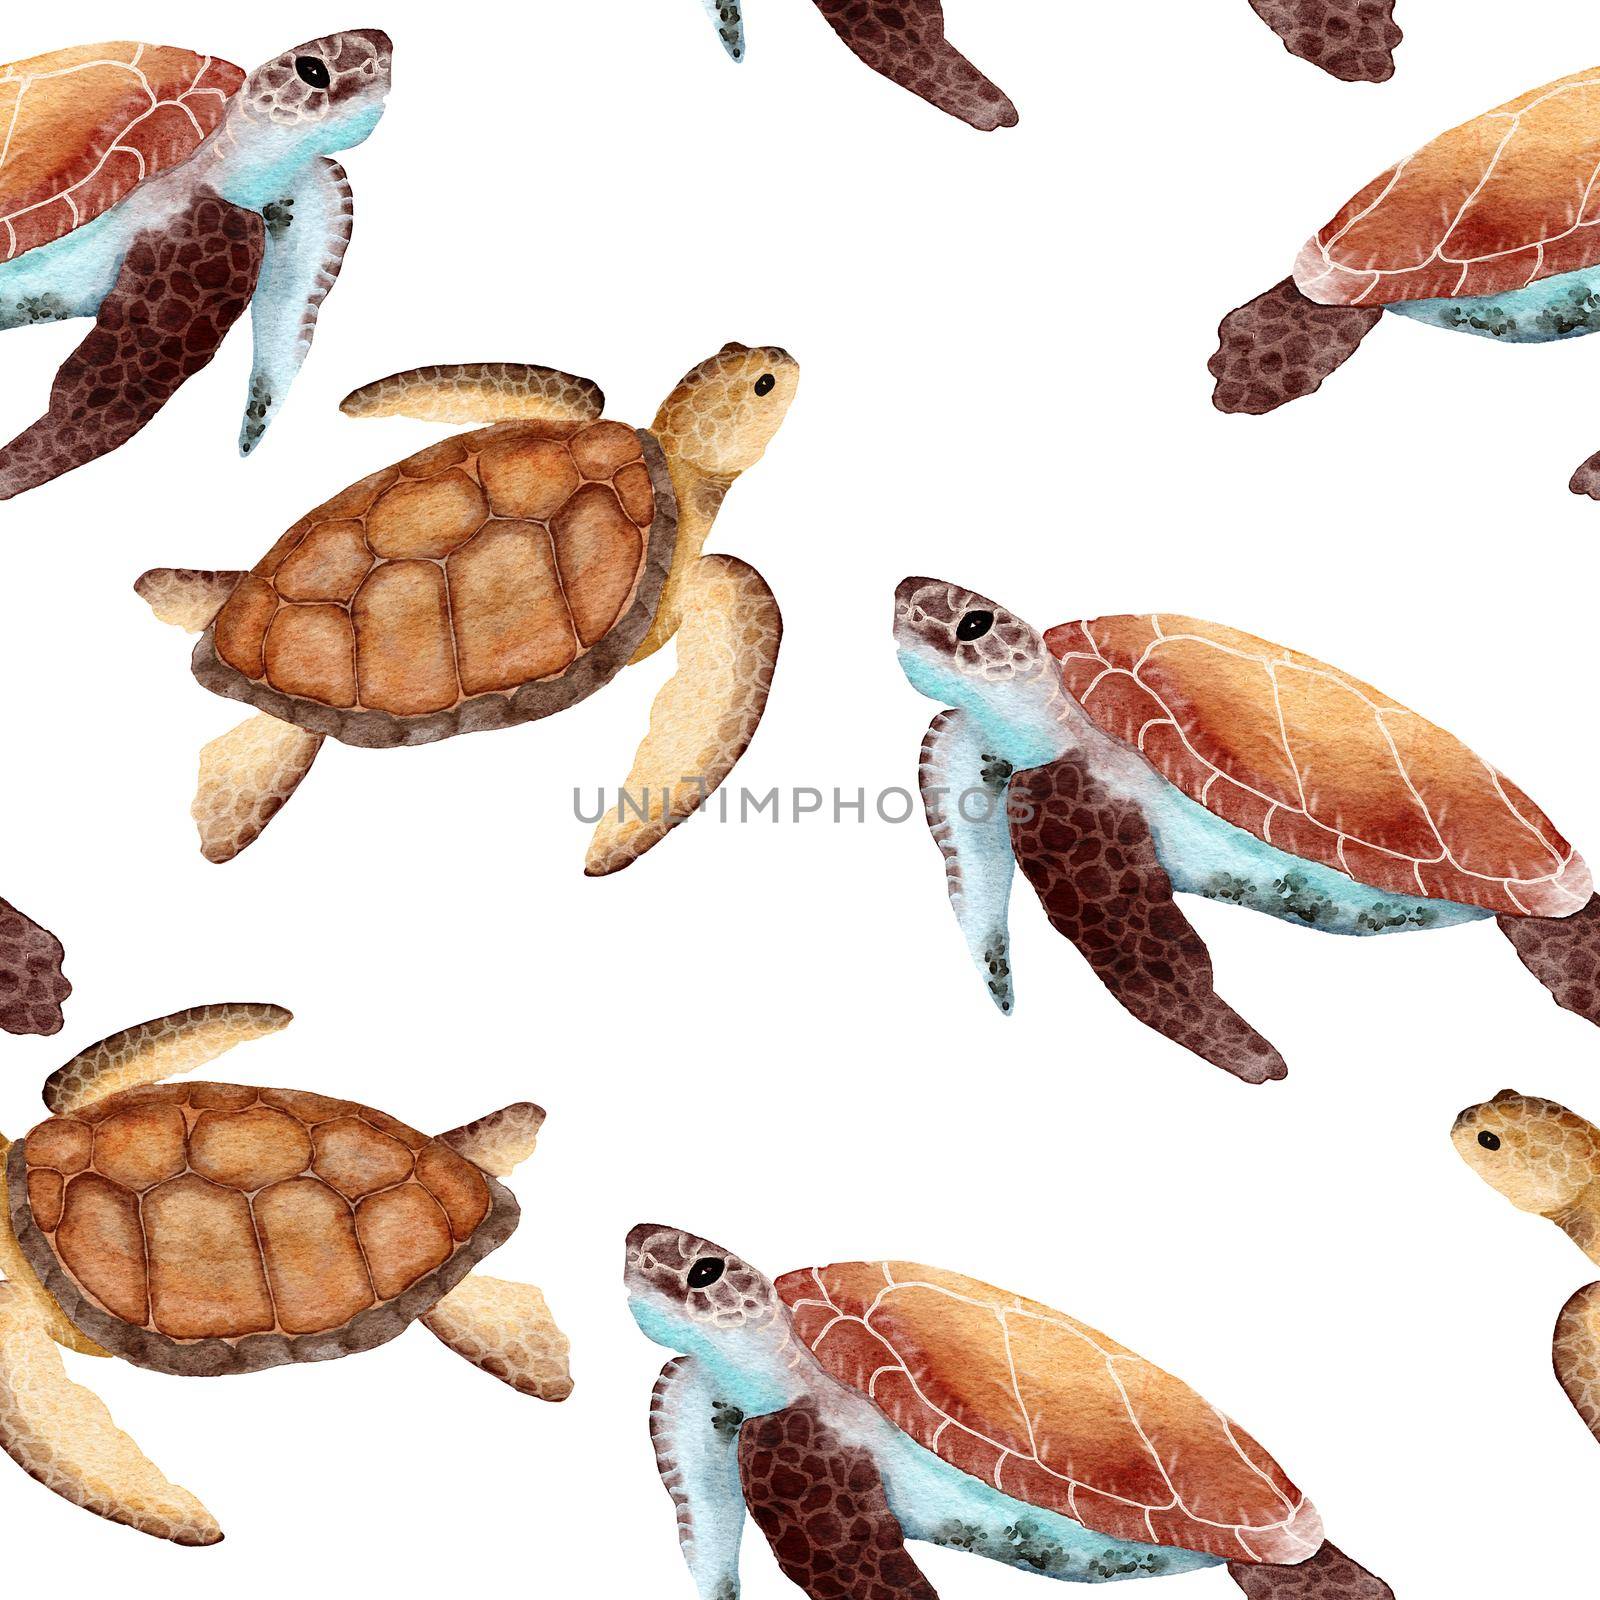 Hand drawn watercolor seamless pattern with turtle tortoise. Sea ocean marine animal, nautical underwater endangered mammal species. Blue gray illustration for fabric nursery decor, under the sea prints